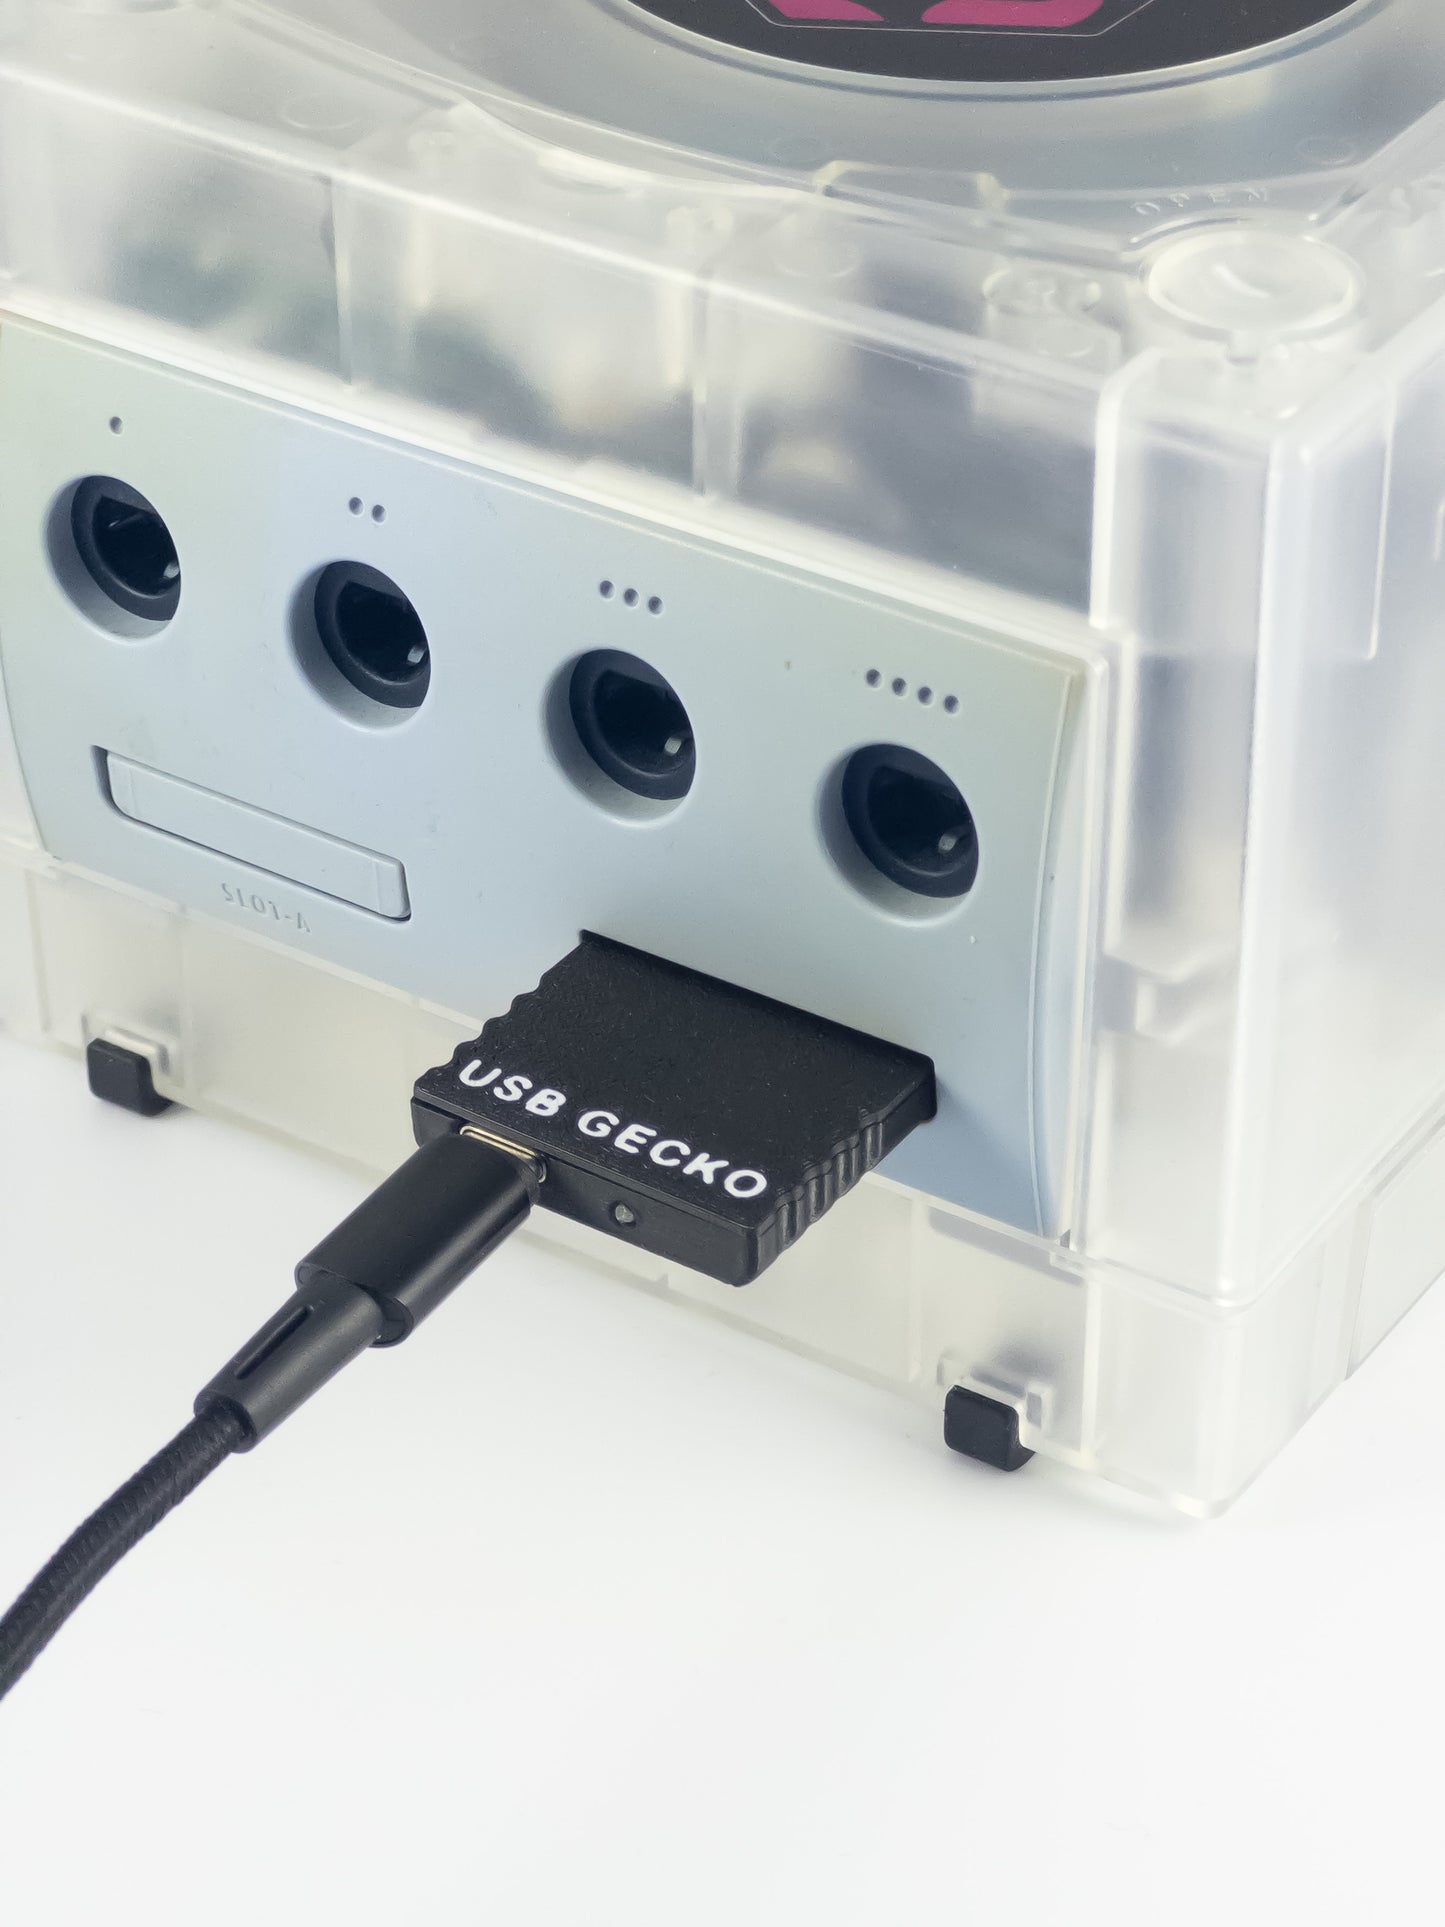 USB Gecko (Type-C) debugging tool for GameCube/Wii